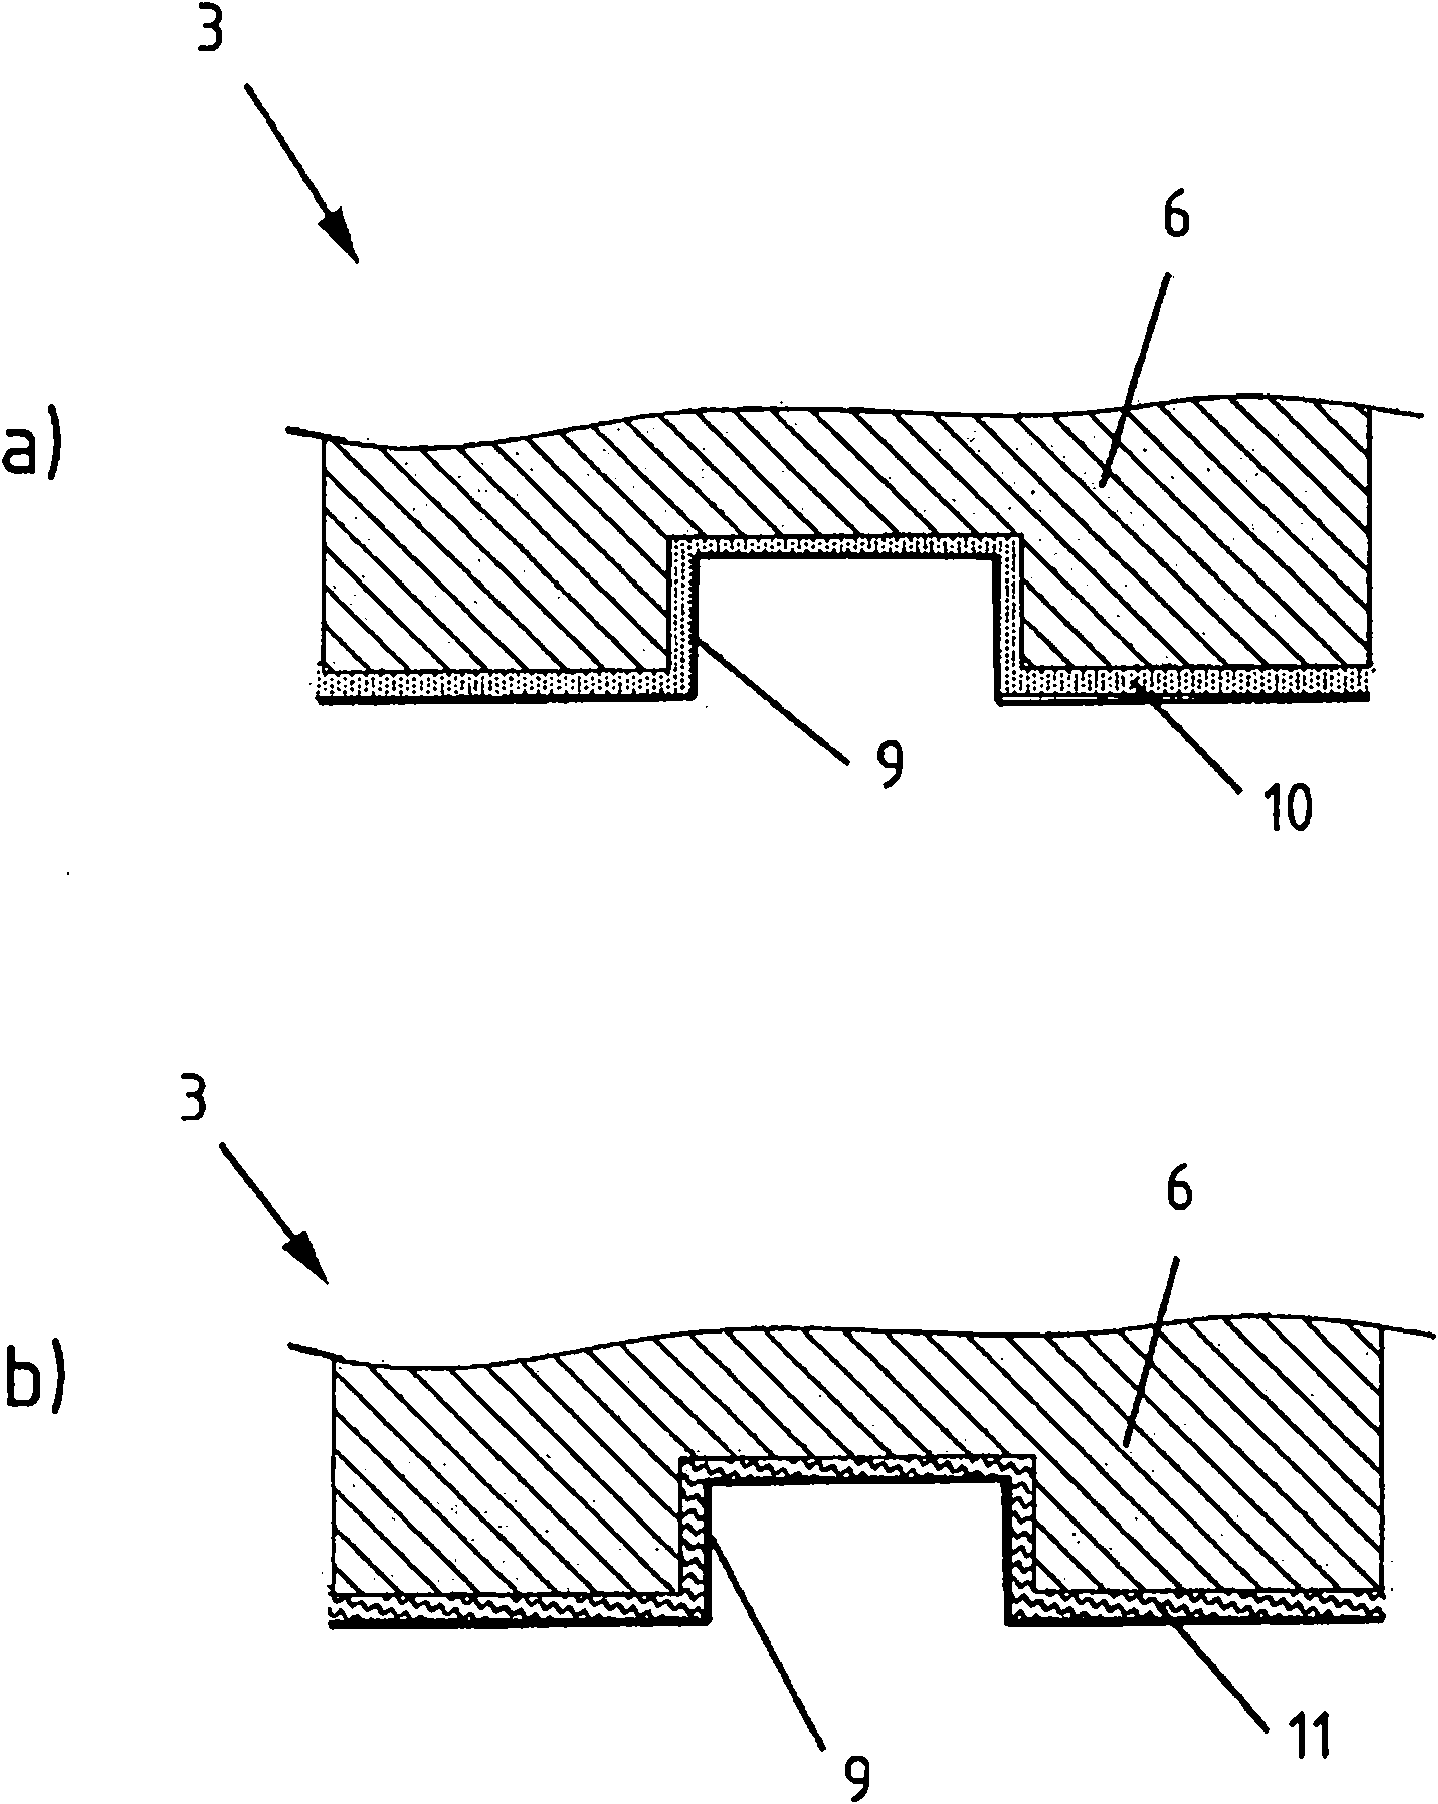 Method for producing a hot-forming tool and hot-forming tool with wear protection